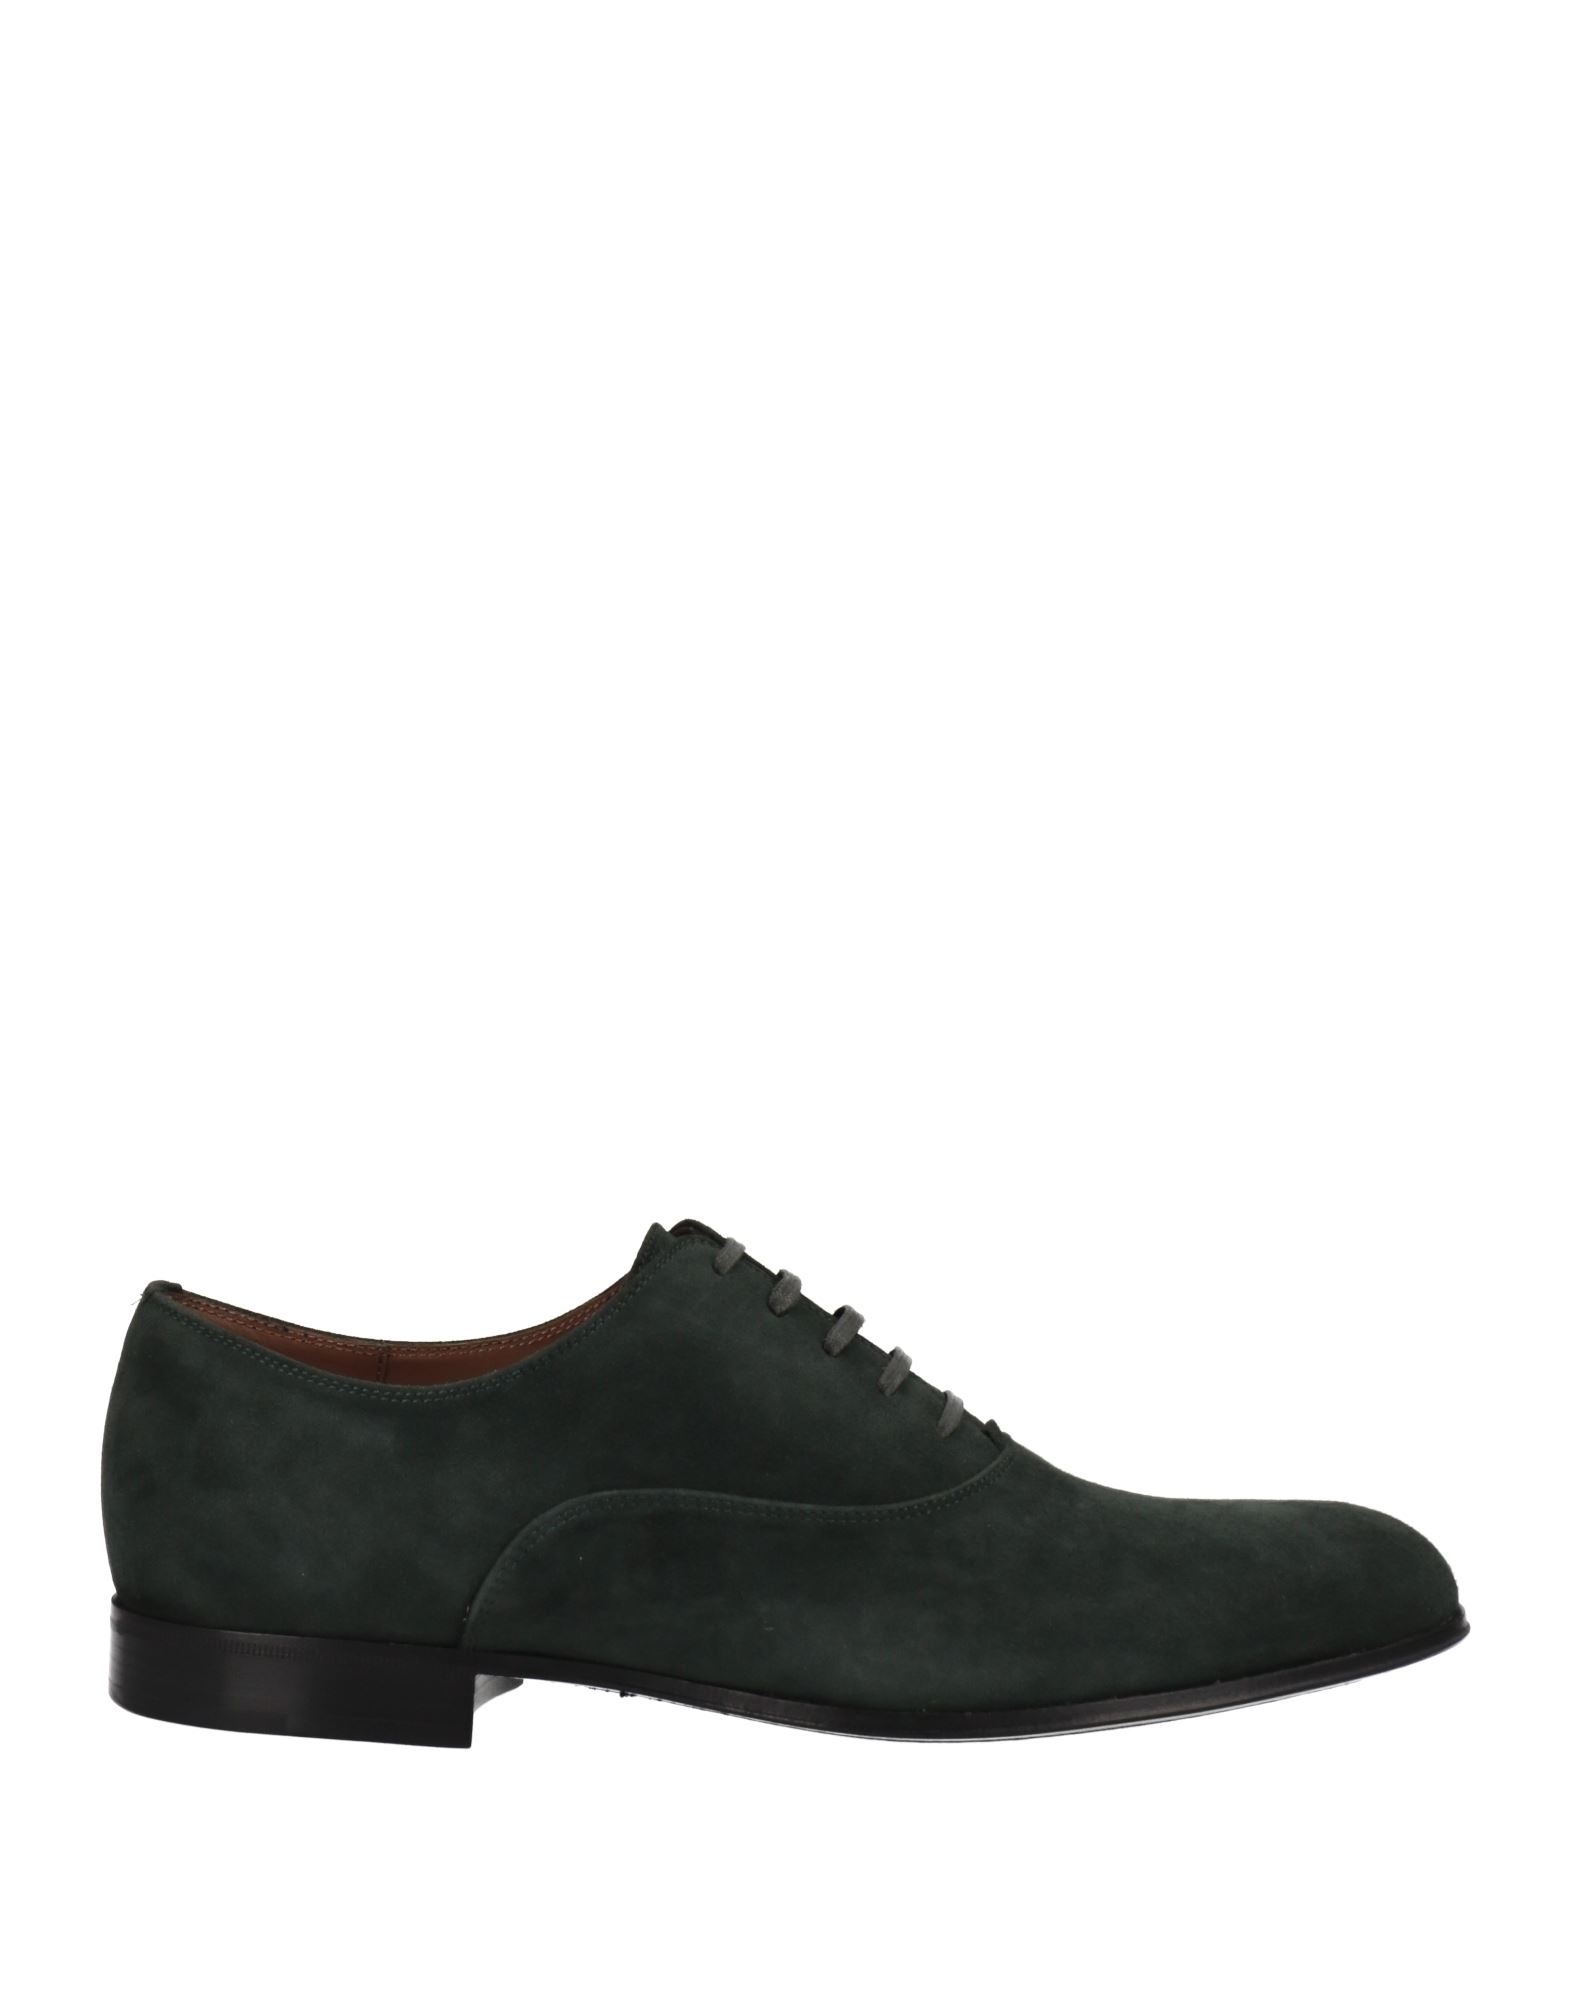 Gianvito Rossi Lace-up Shoes In Dark Green